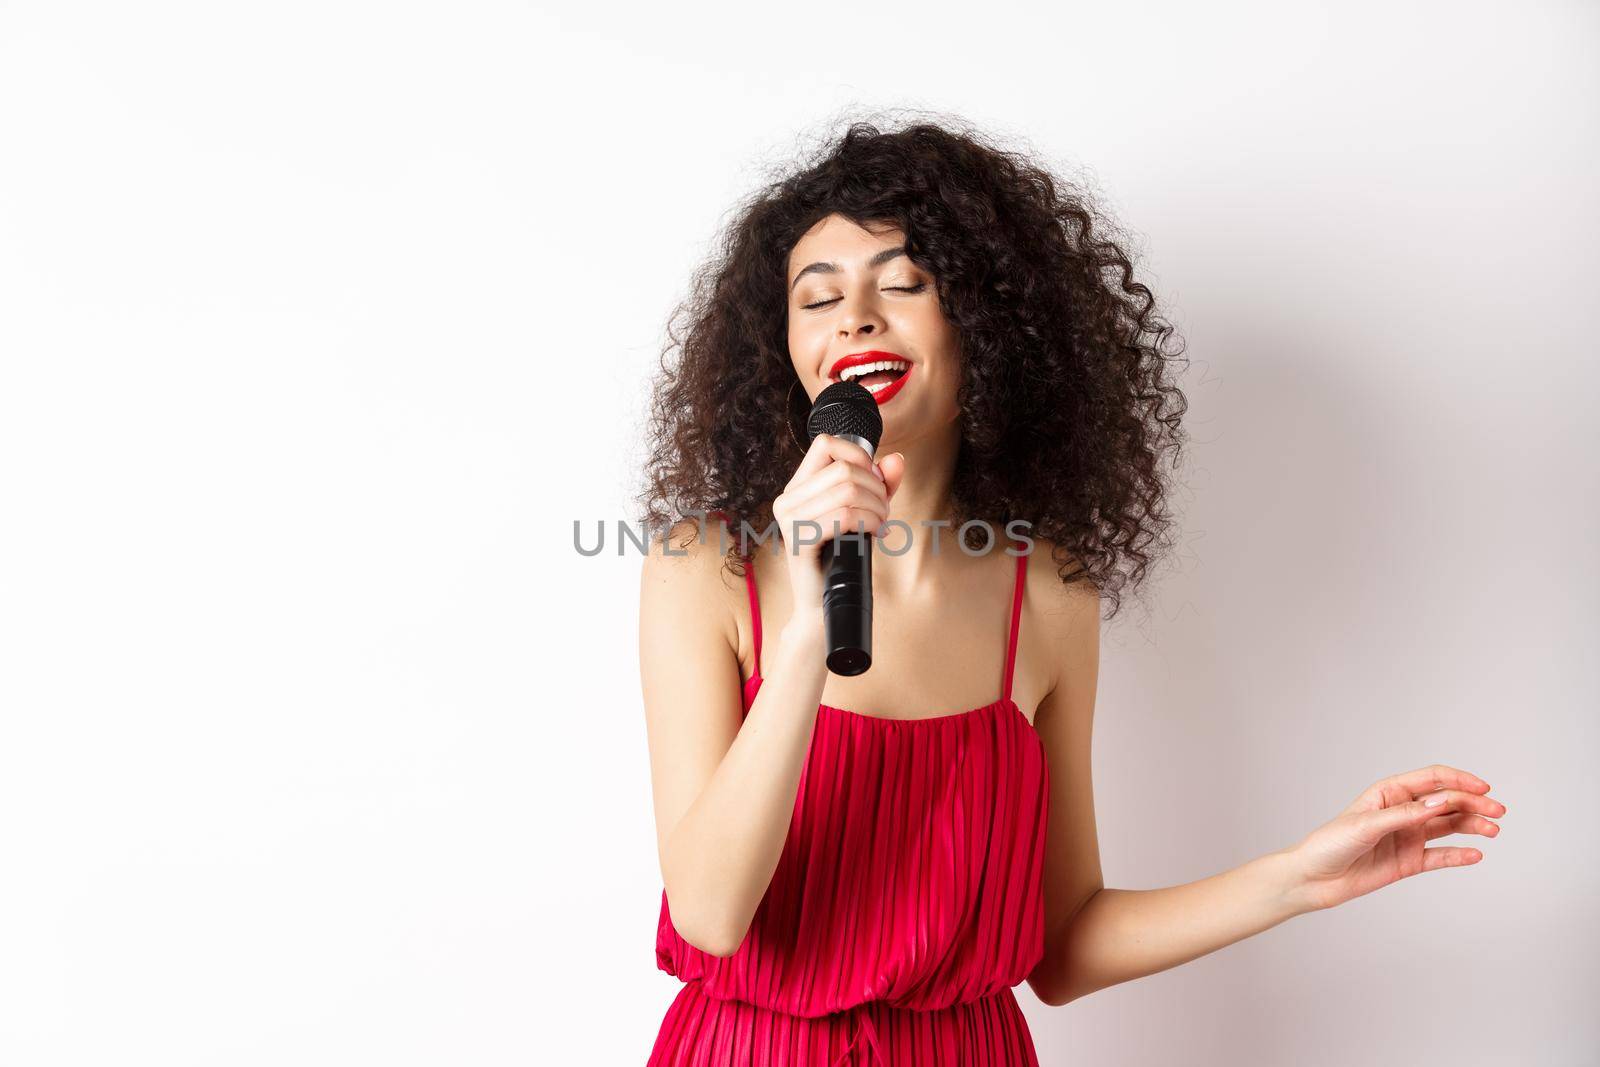 Happy elegant woman in red dress performing with microphone, singing karaoke and smiling, standing over white background.